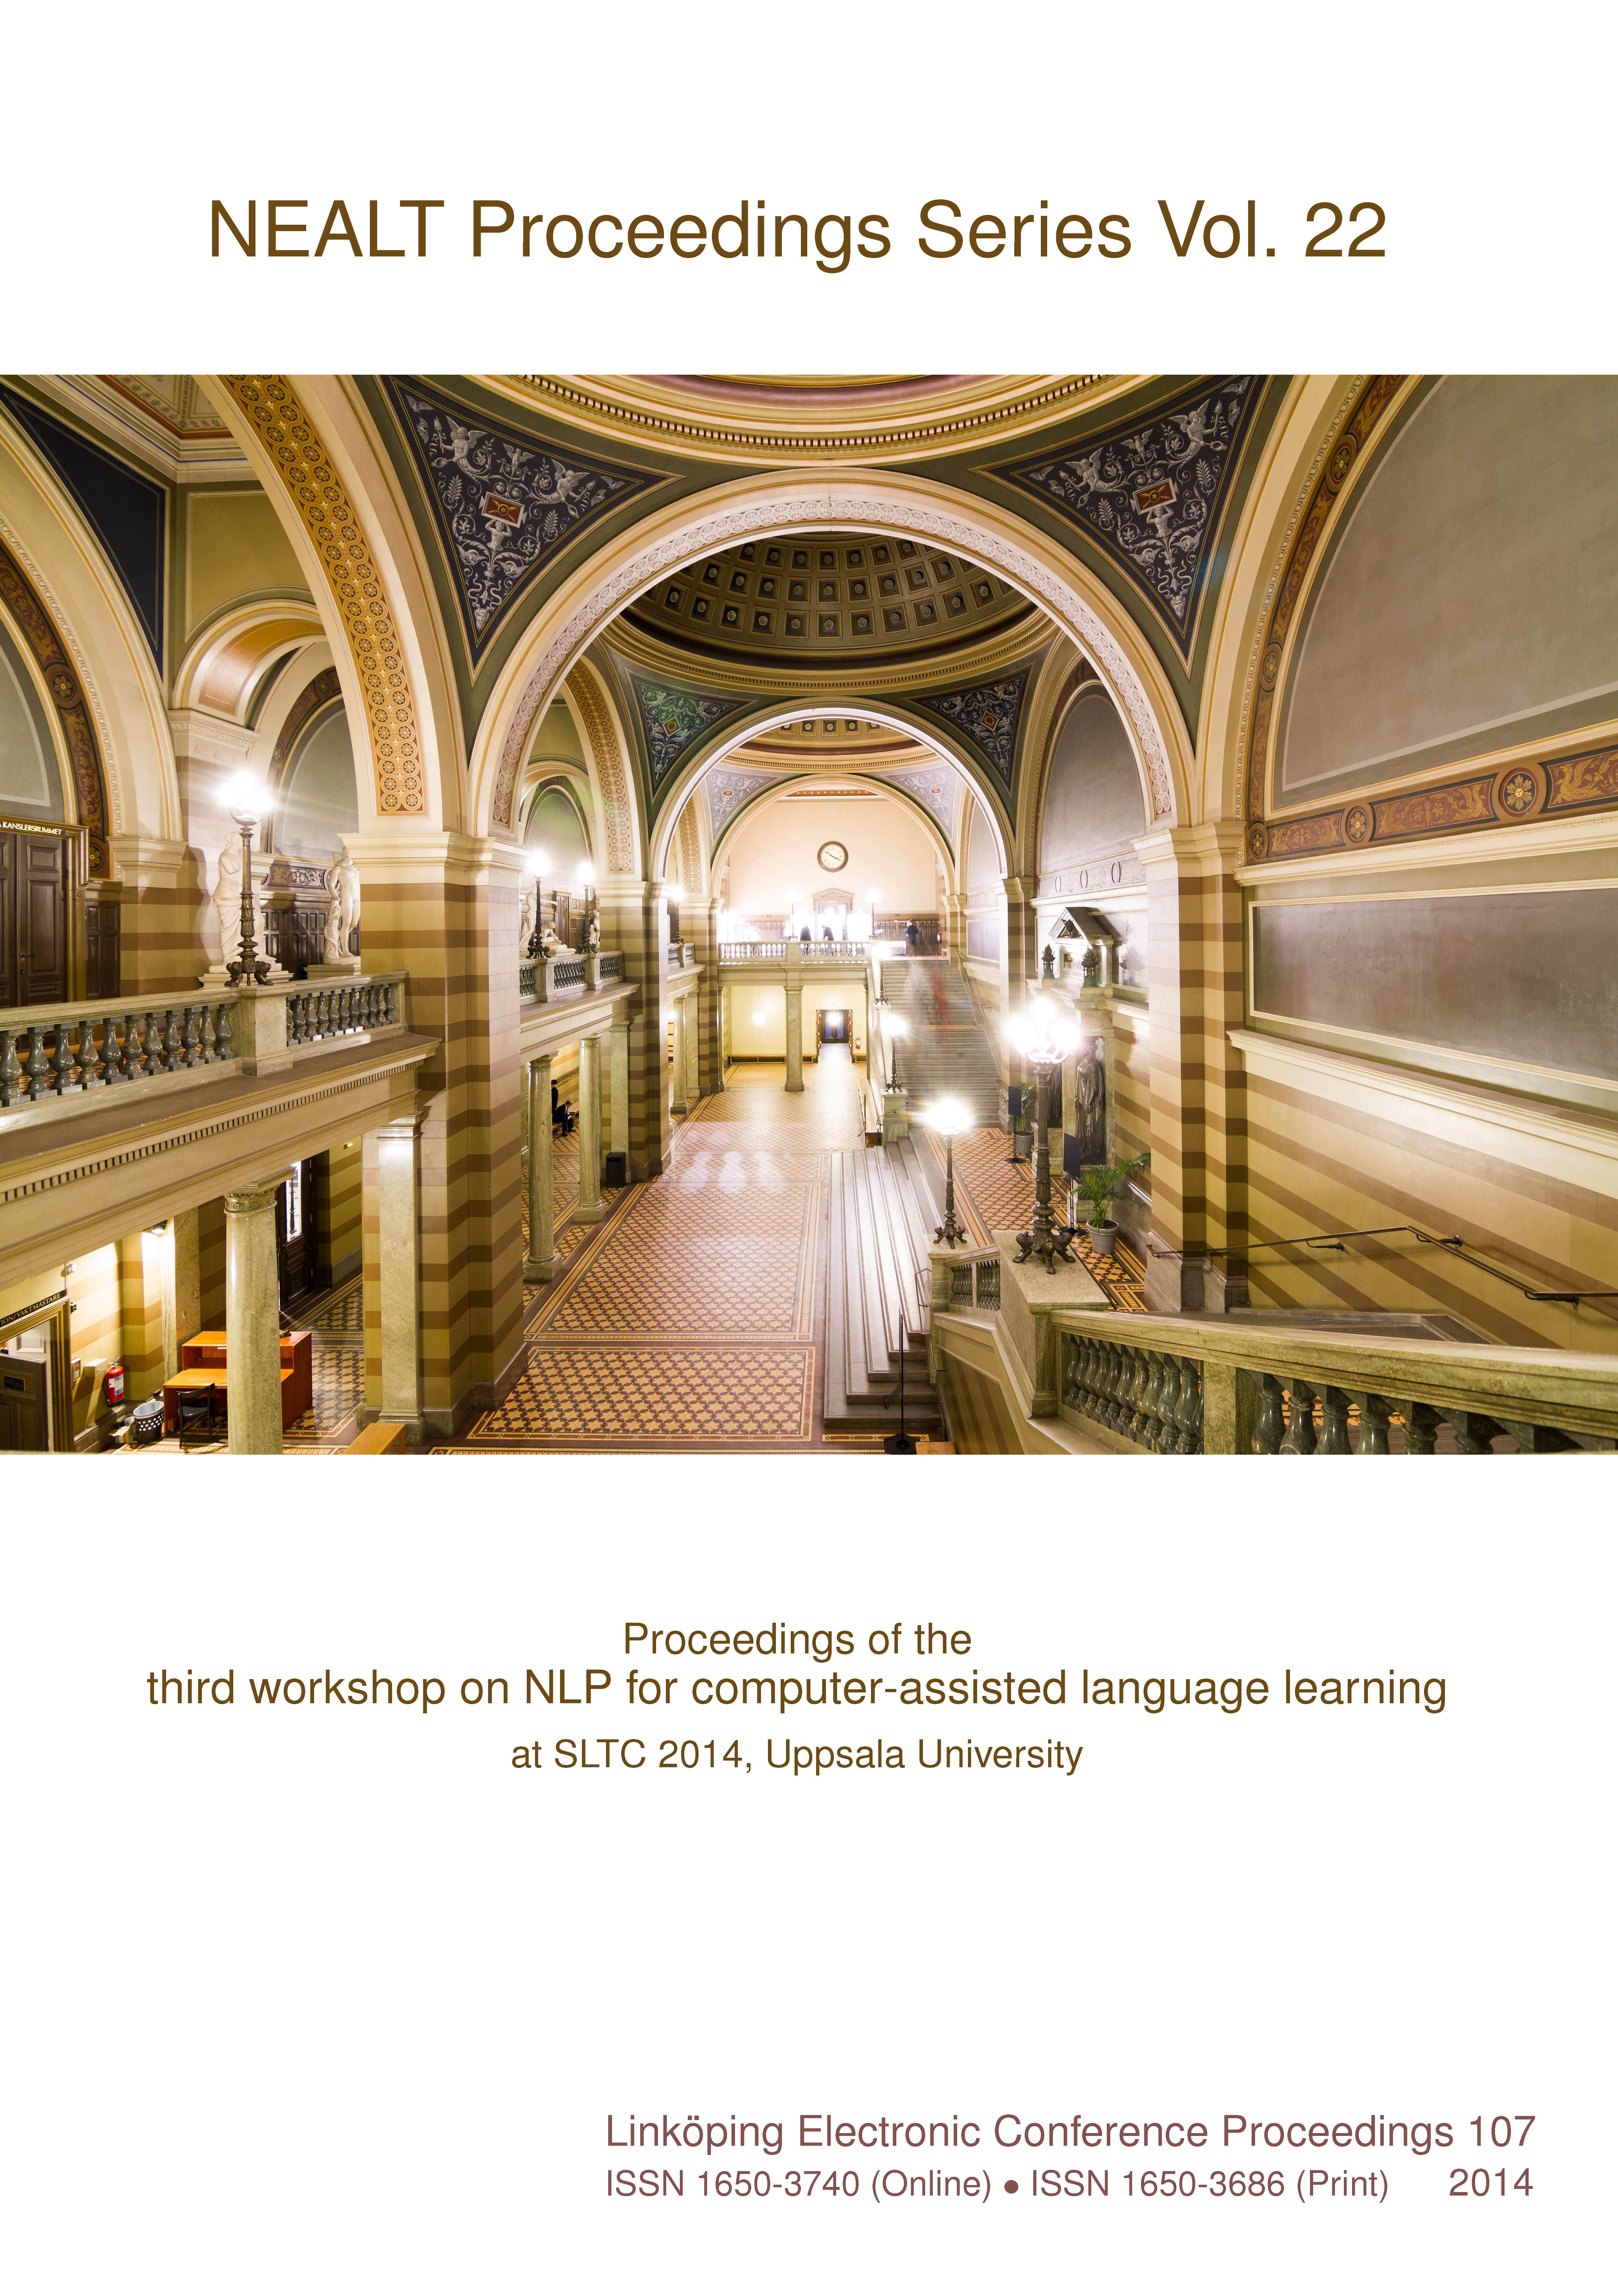 					View Proceedings of the third workshop on NLP for computer-assisted language learning at SLTC 2014, Uppsala University
				